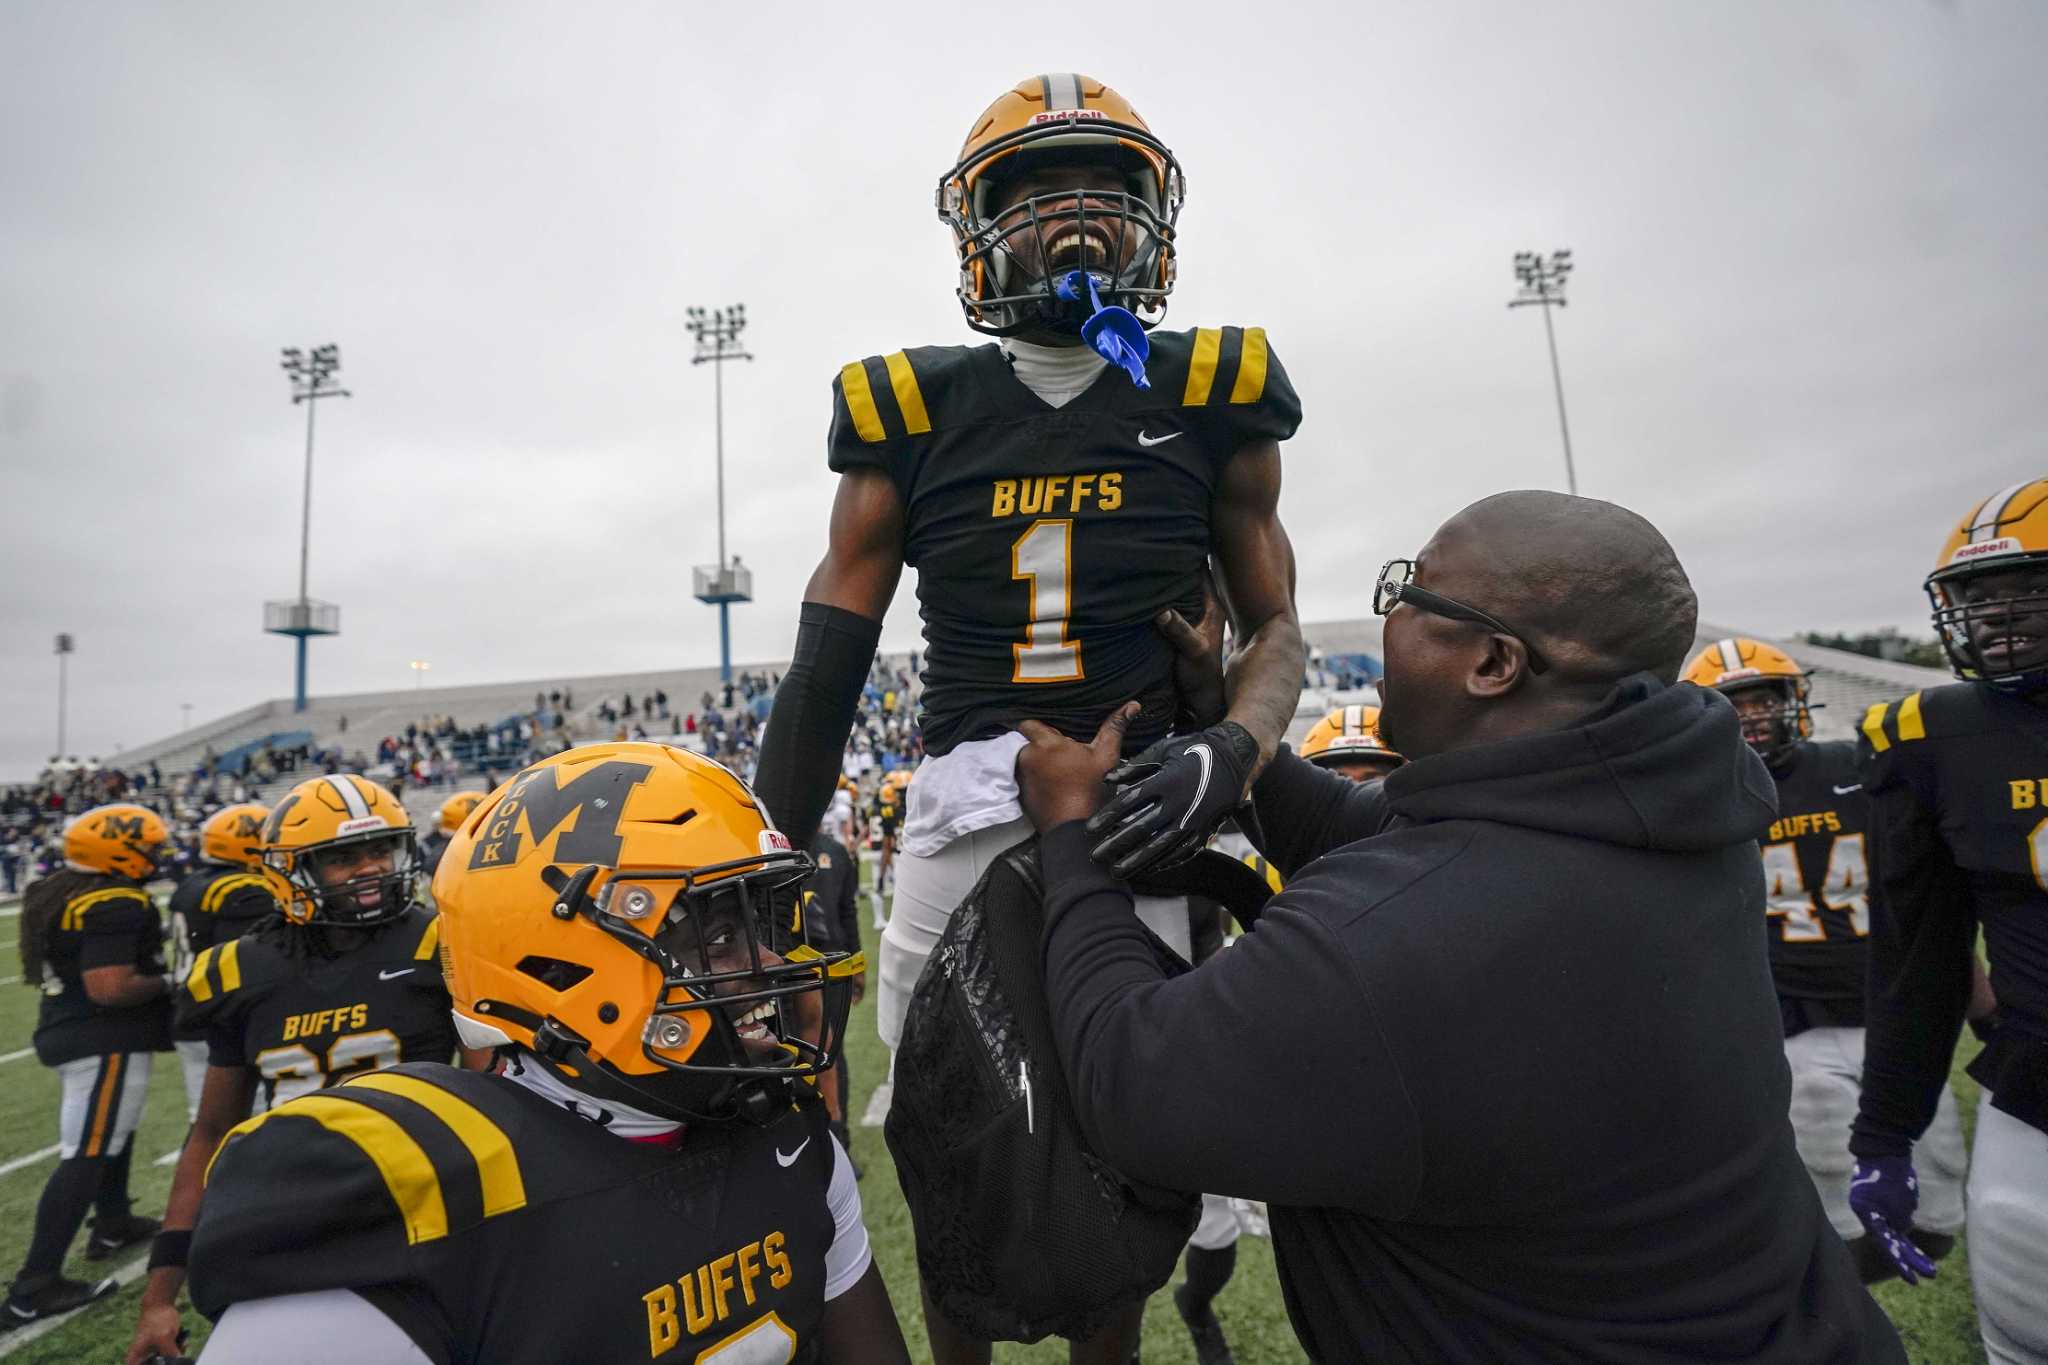 Friday's statewide Texas high school football playoff scores